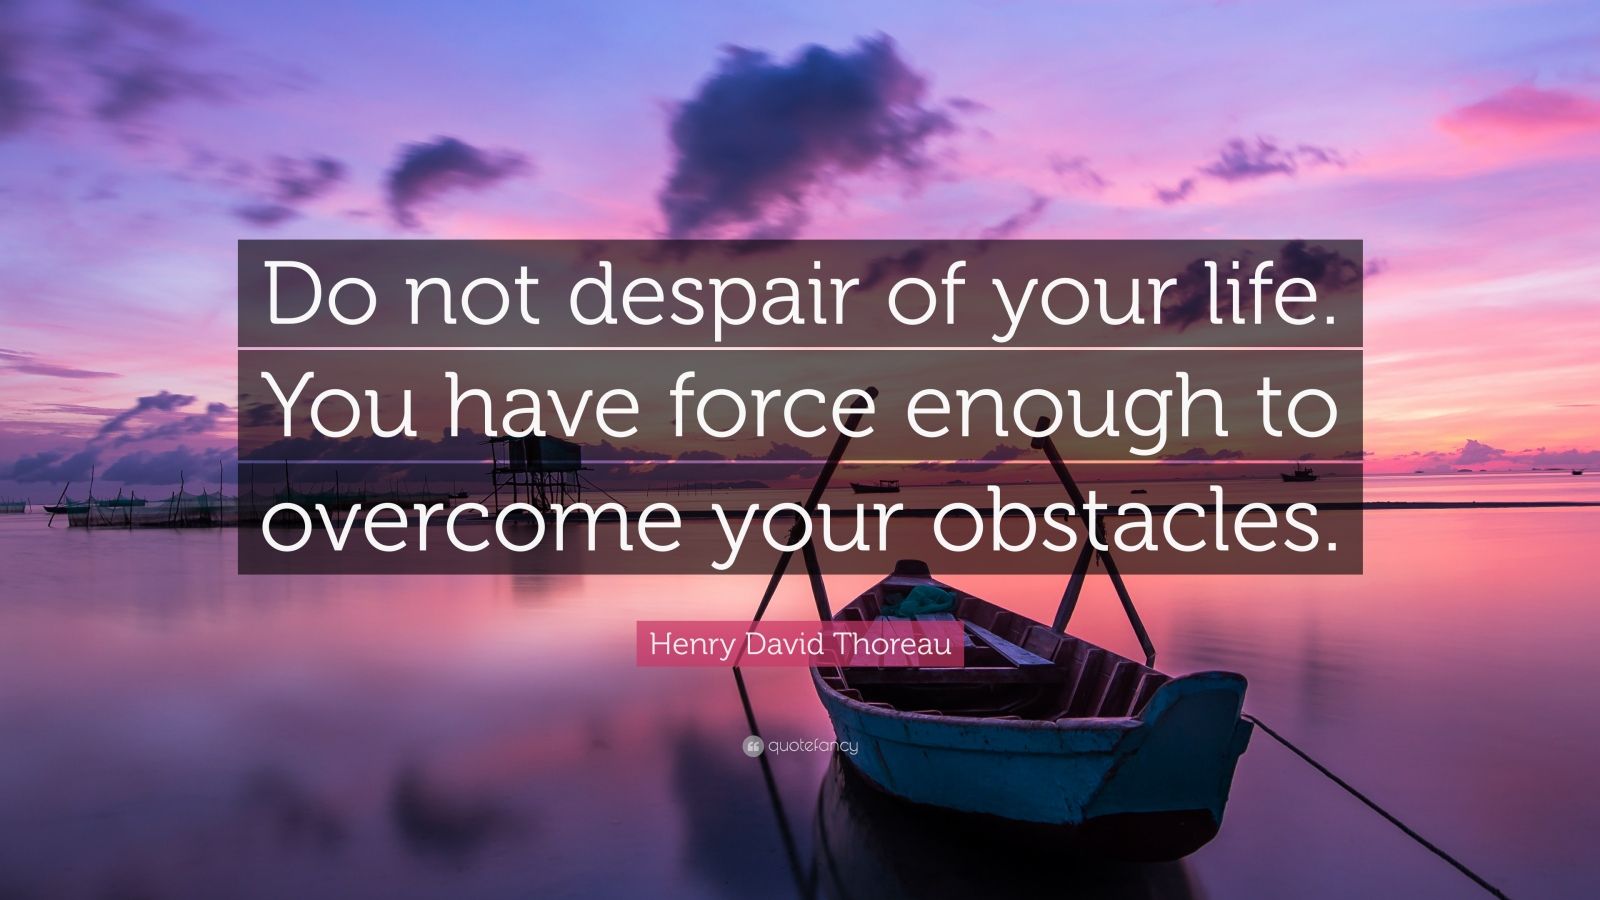 Henry David Thoreau Quote: “Do not despair of your life. You have force